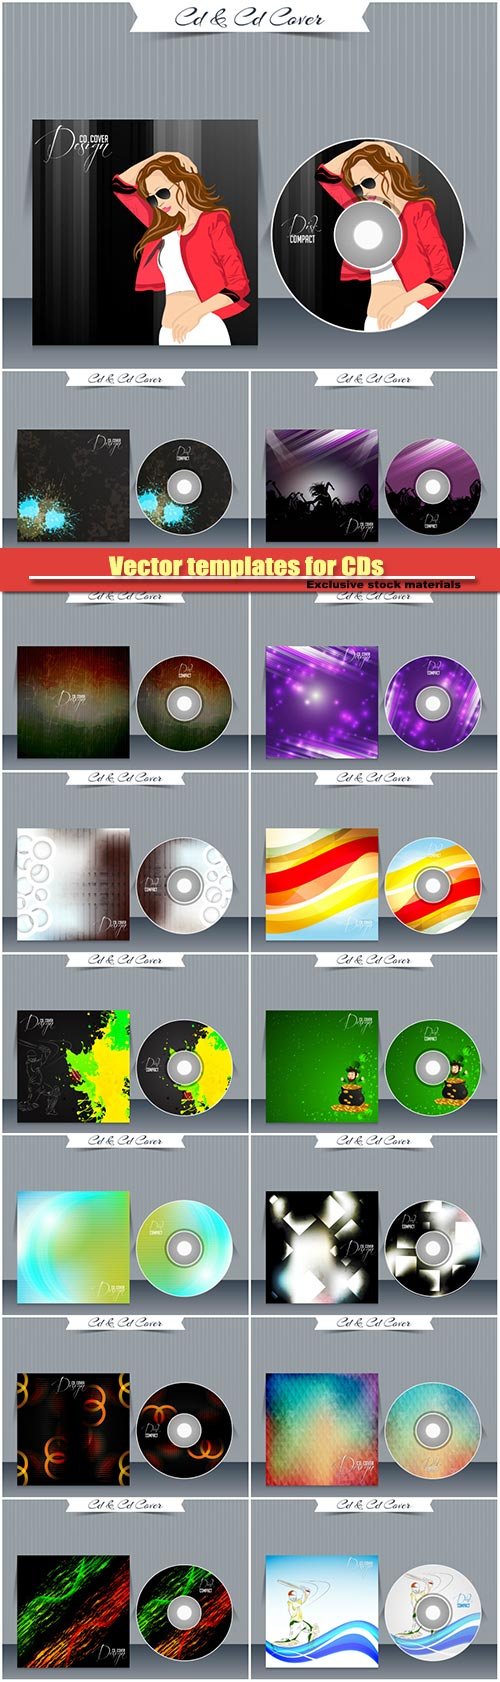 Vector templates for CDs